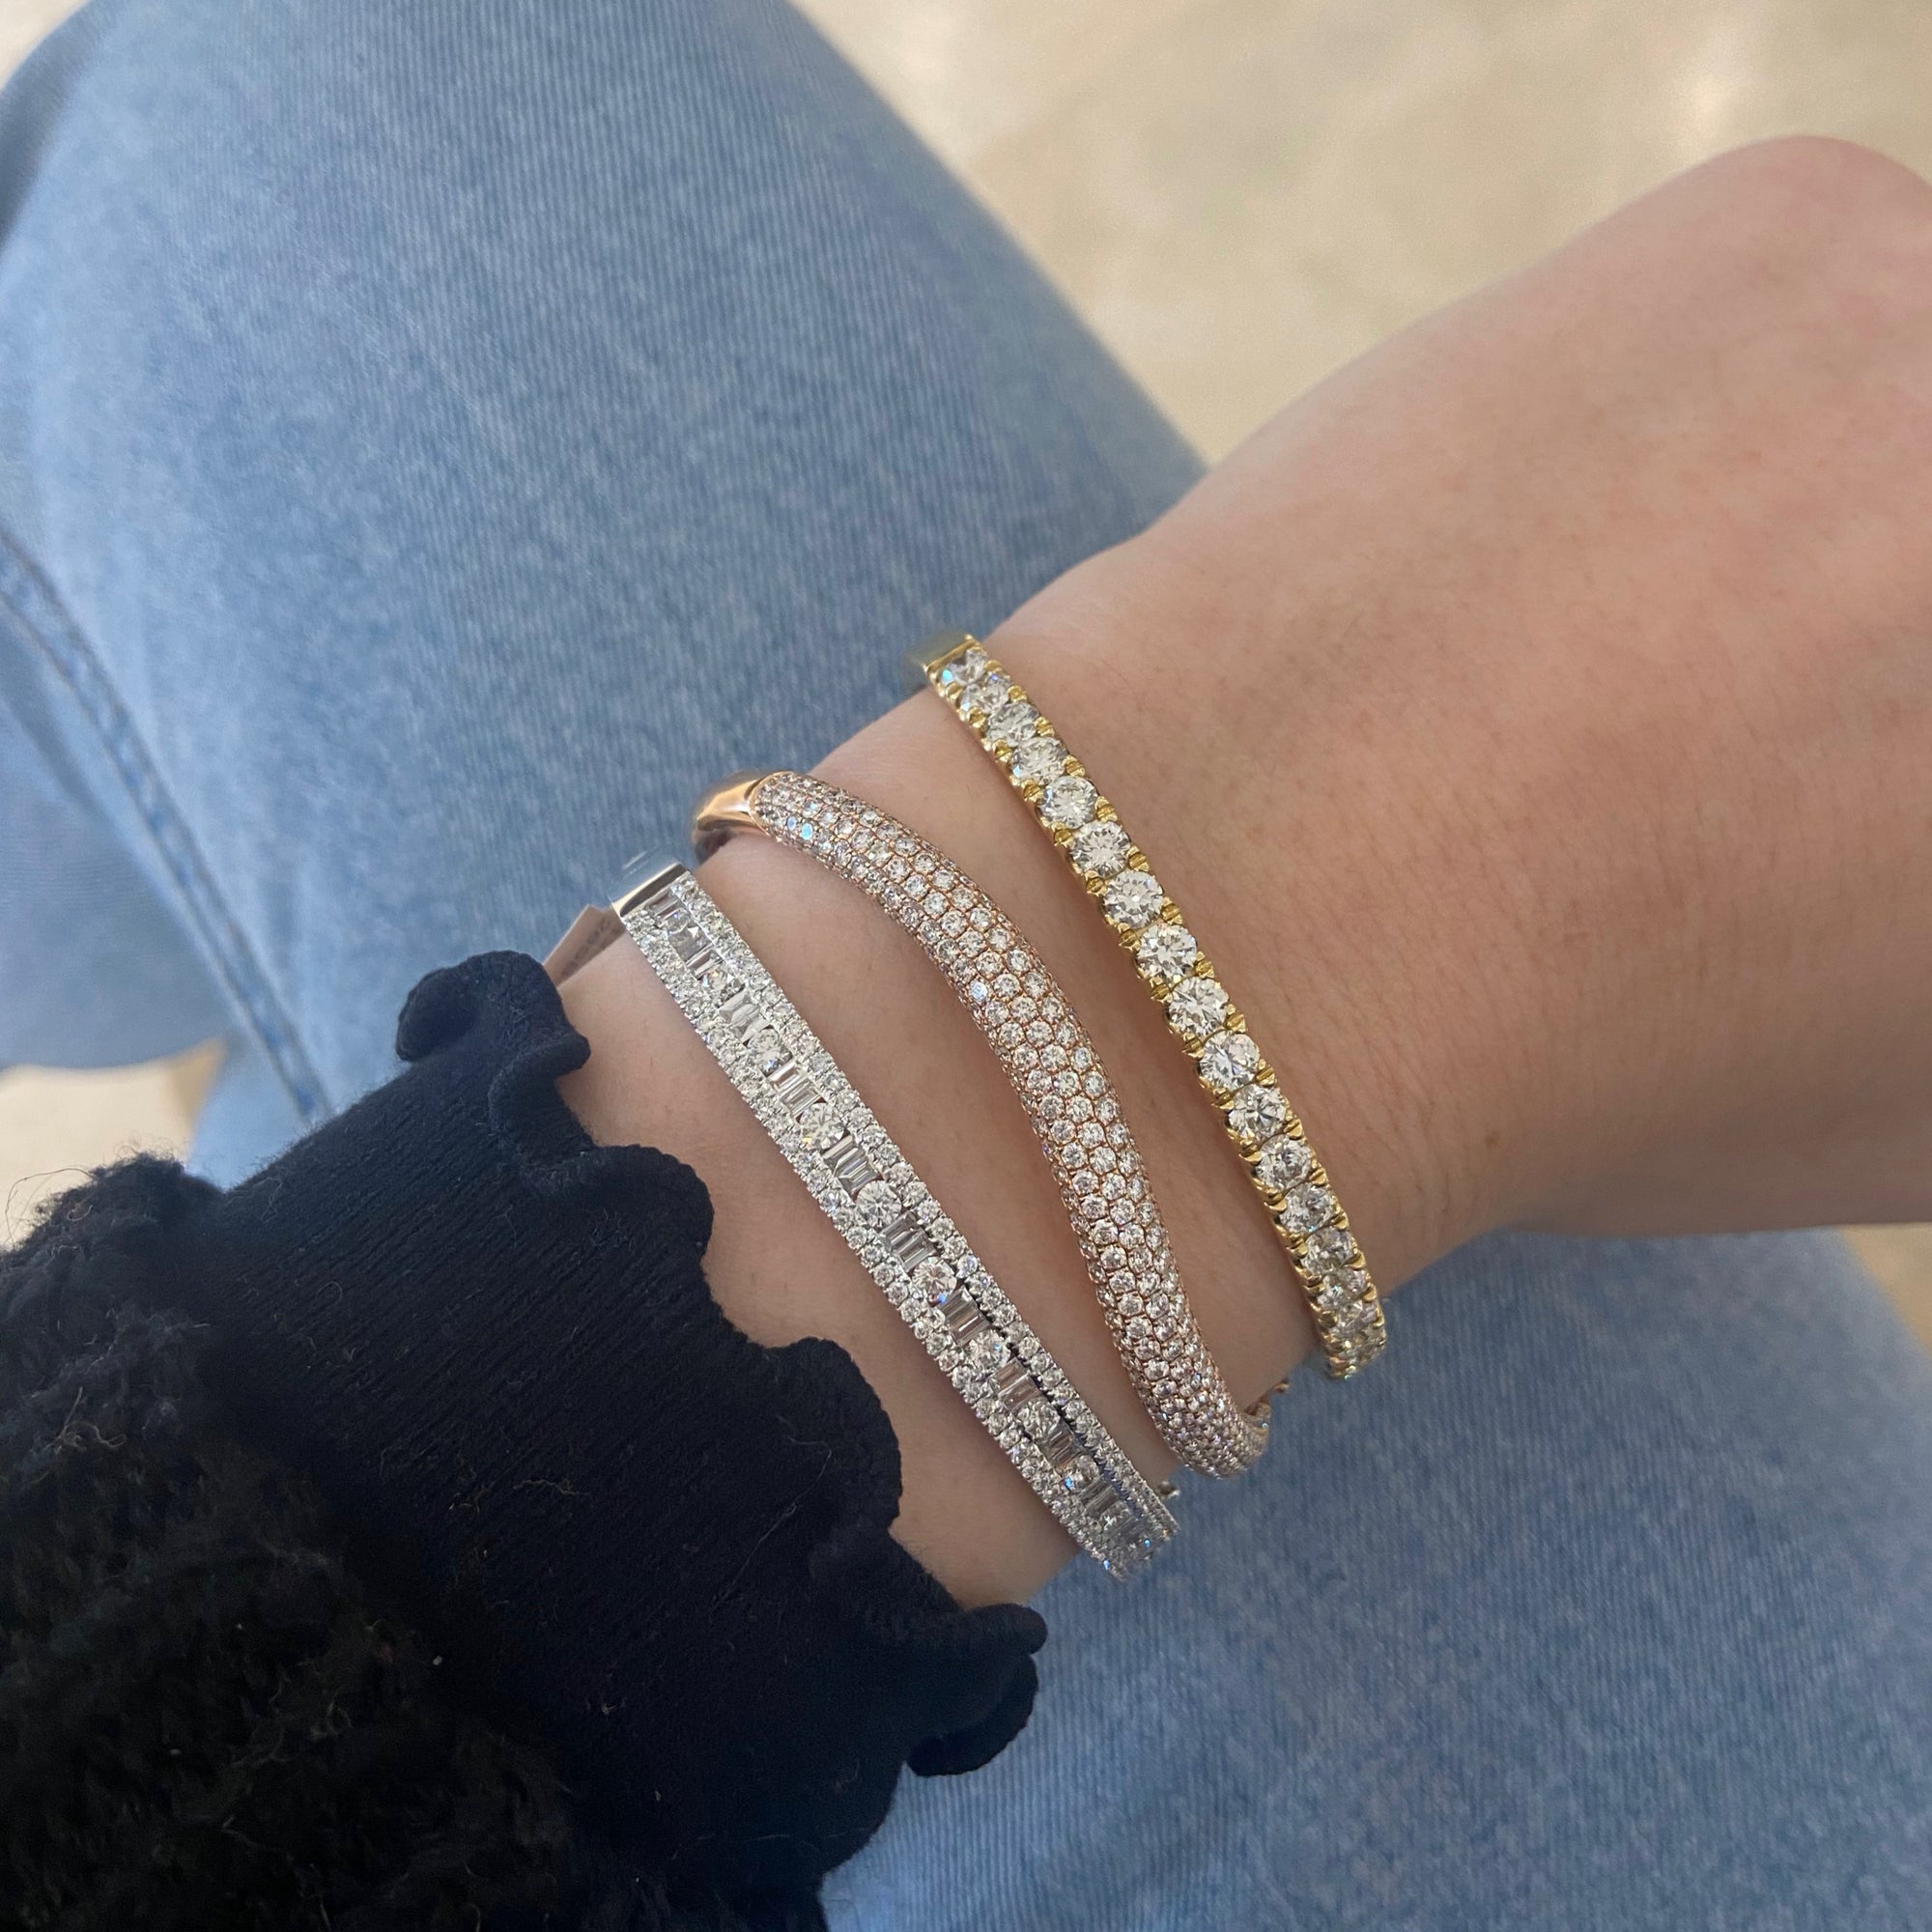 Round & Baguette Diamond Bangle - 14K gold weighing 13.12 grams  - 143 round diamonds totaling 1.92 carats  - 24 straight baguettes weighing 0.73 carats